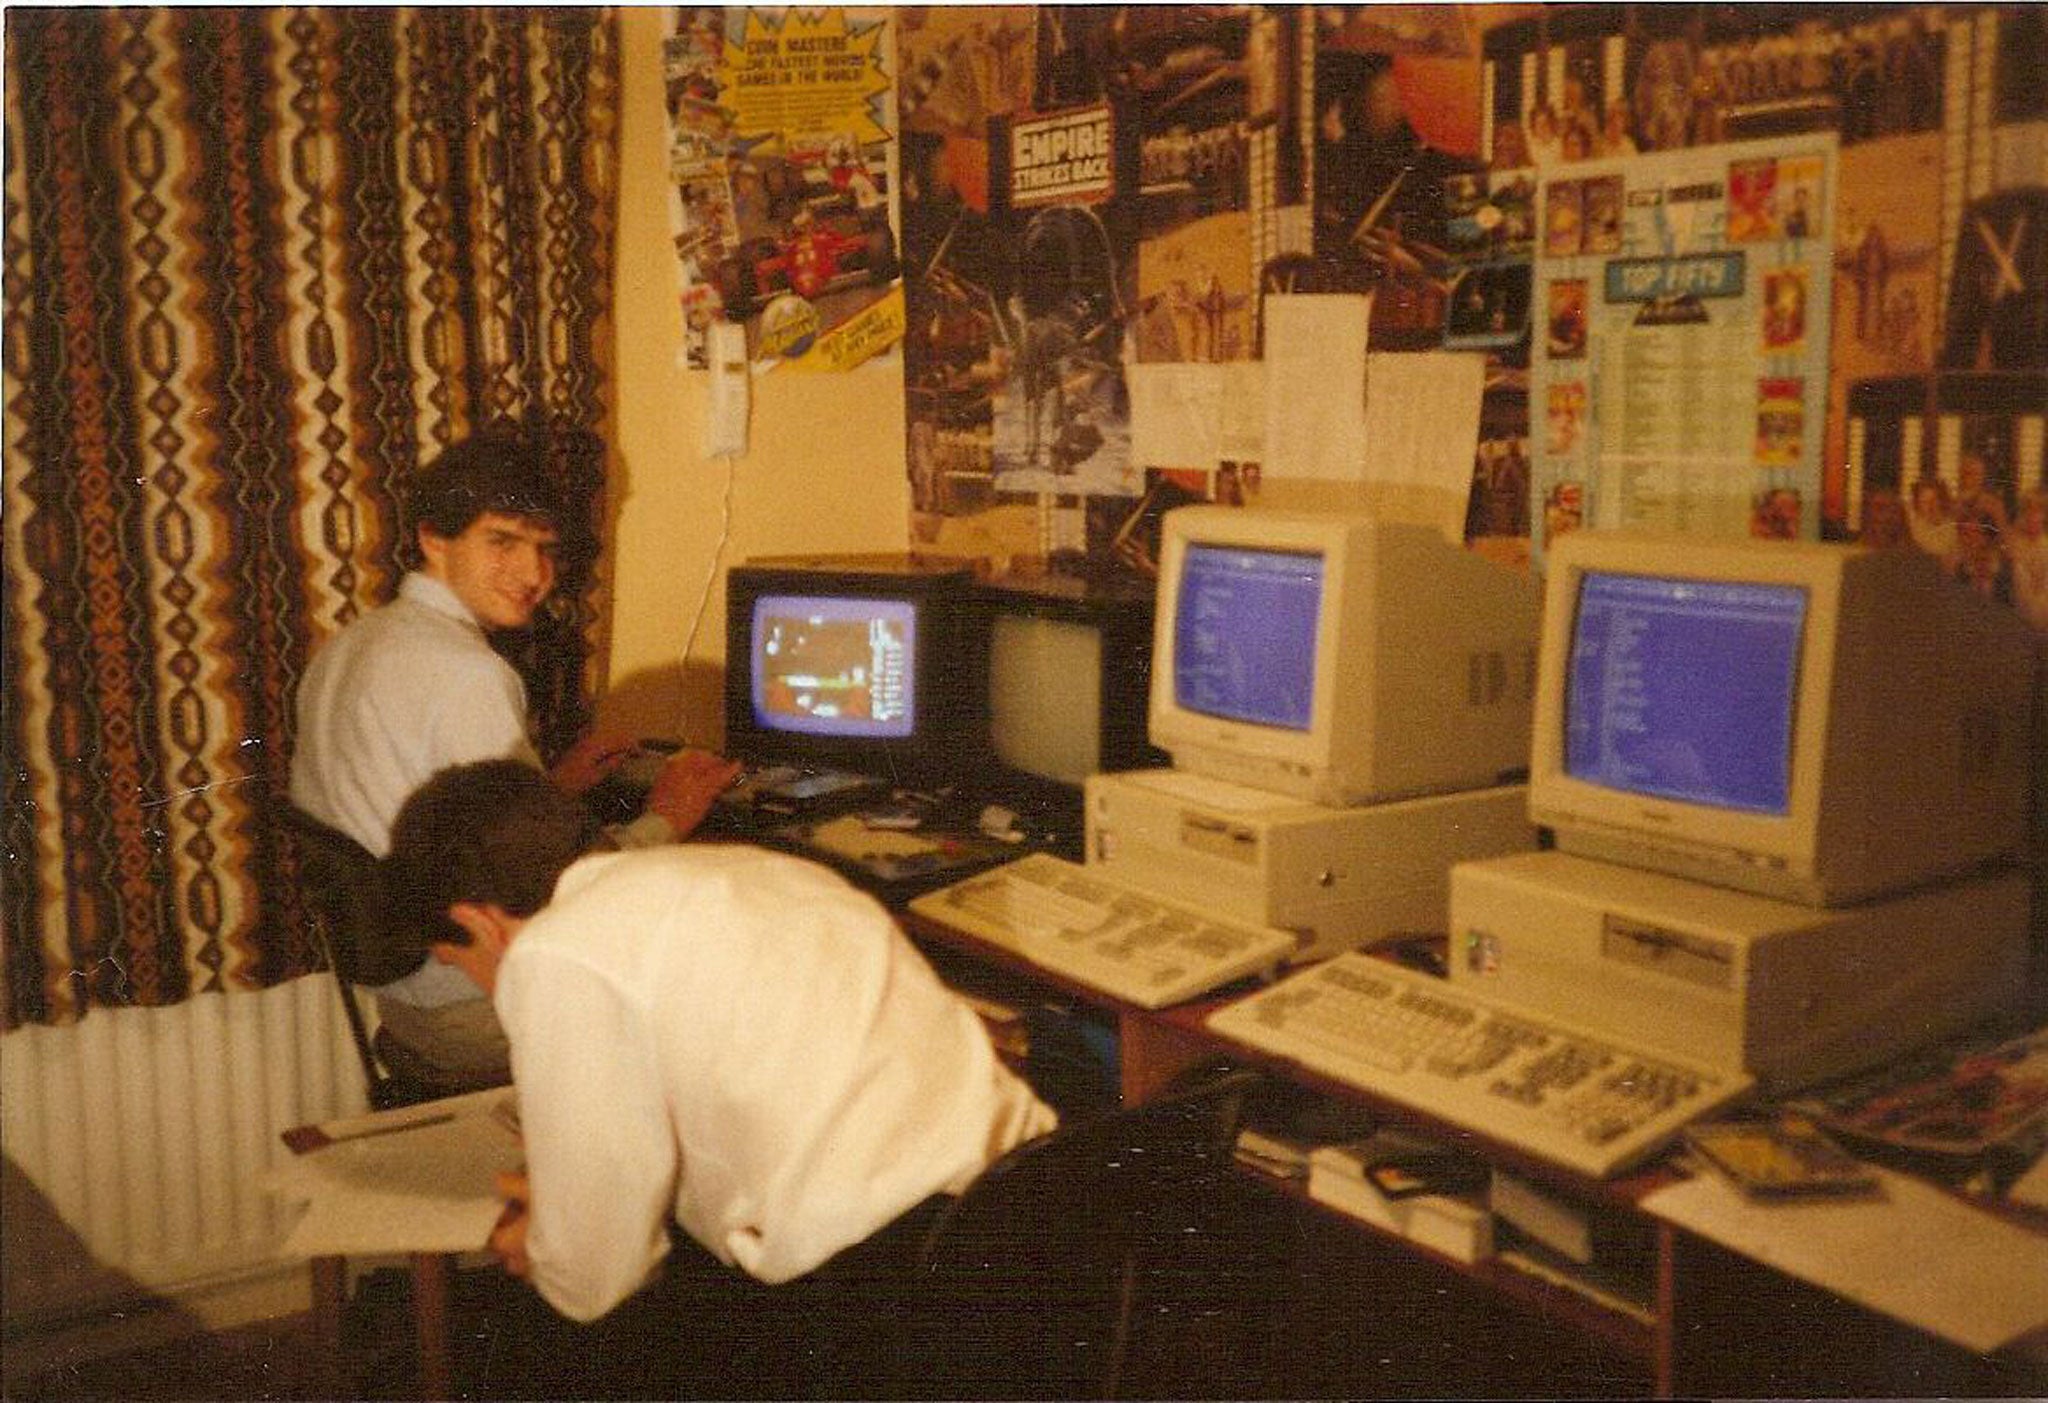 The Oliver twins, Philip and Andrew, at work creating the 'Dizzy' arcade-adventure games in 1988